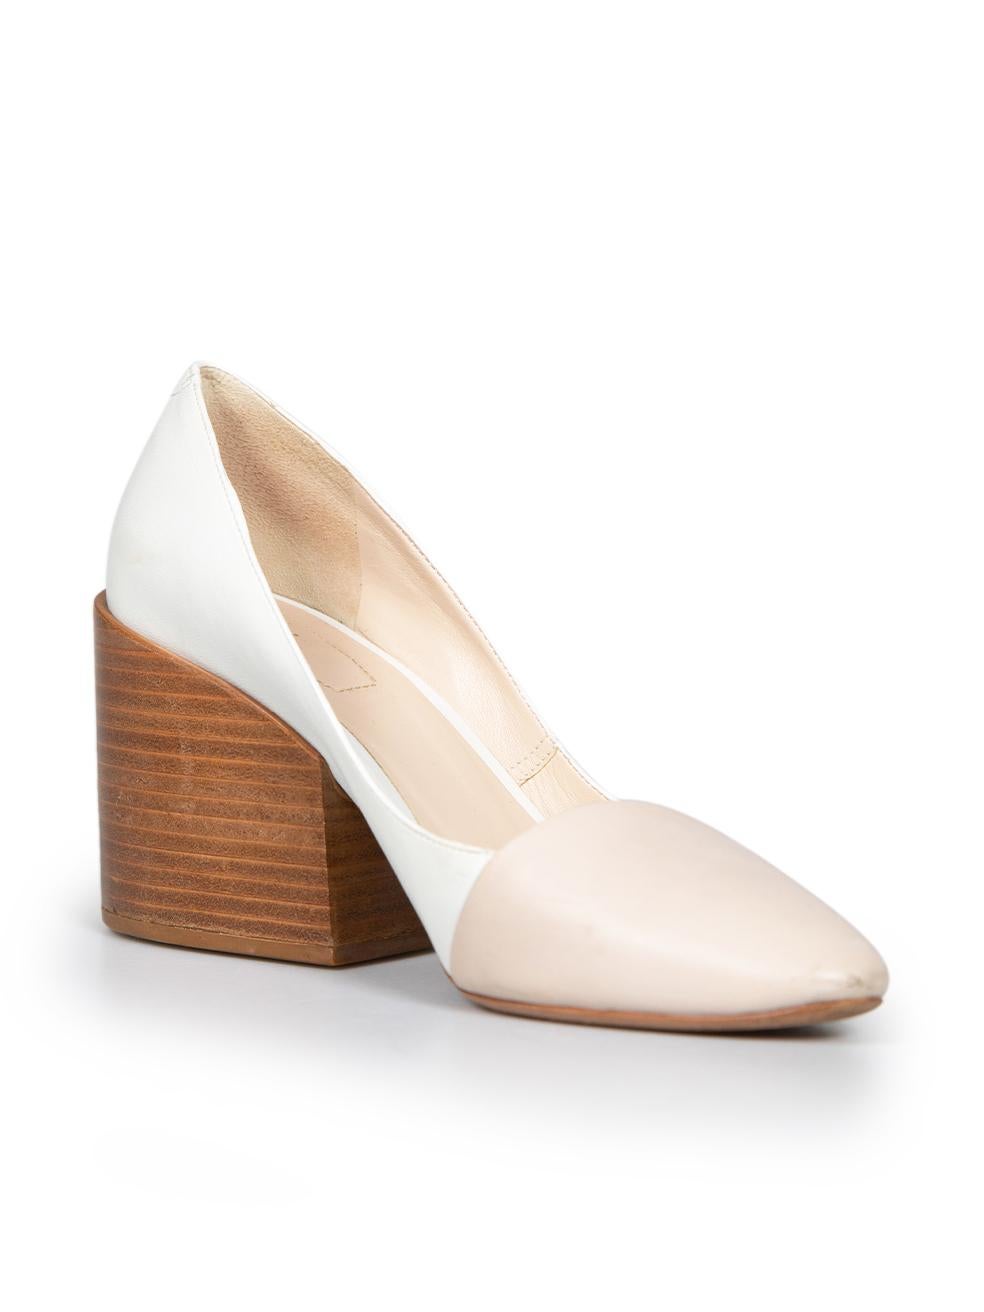 CONDITION is Good. Minor wear to heels is evident. Light wear to leather outer at toe edge, sides and insoles on this used Chloé designer resale item.
 
 
 
 Details
 
 
 Beige and white
 
 Leather
 
 Pumps
 
 Almond toe
 
 Wooden block heel
 
 Mid